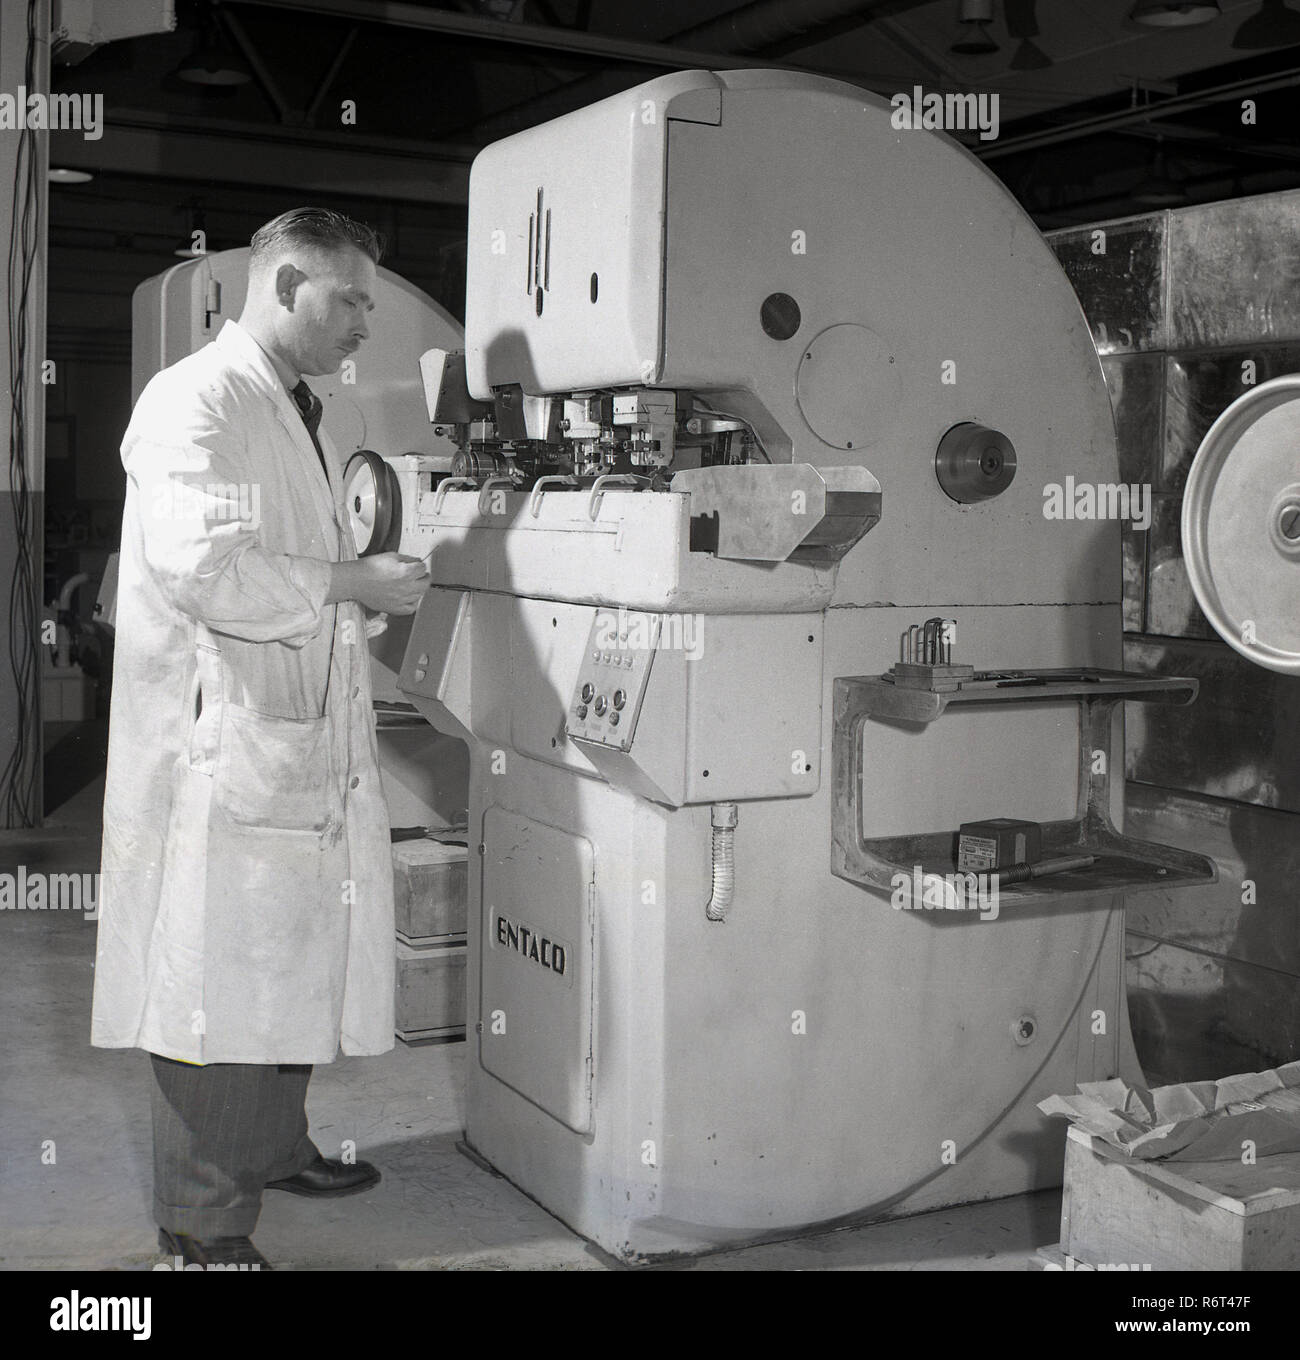 1950s, historical, a white-coated male technican working at a large industrial needle making machine made by Entaco, England, UK. Stock Photo